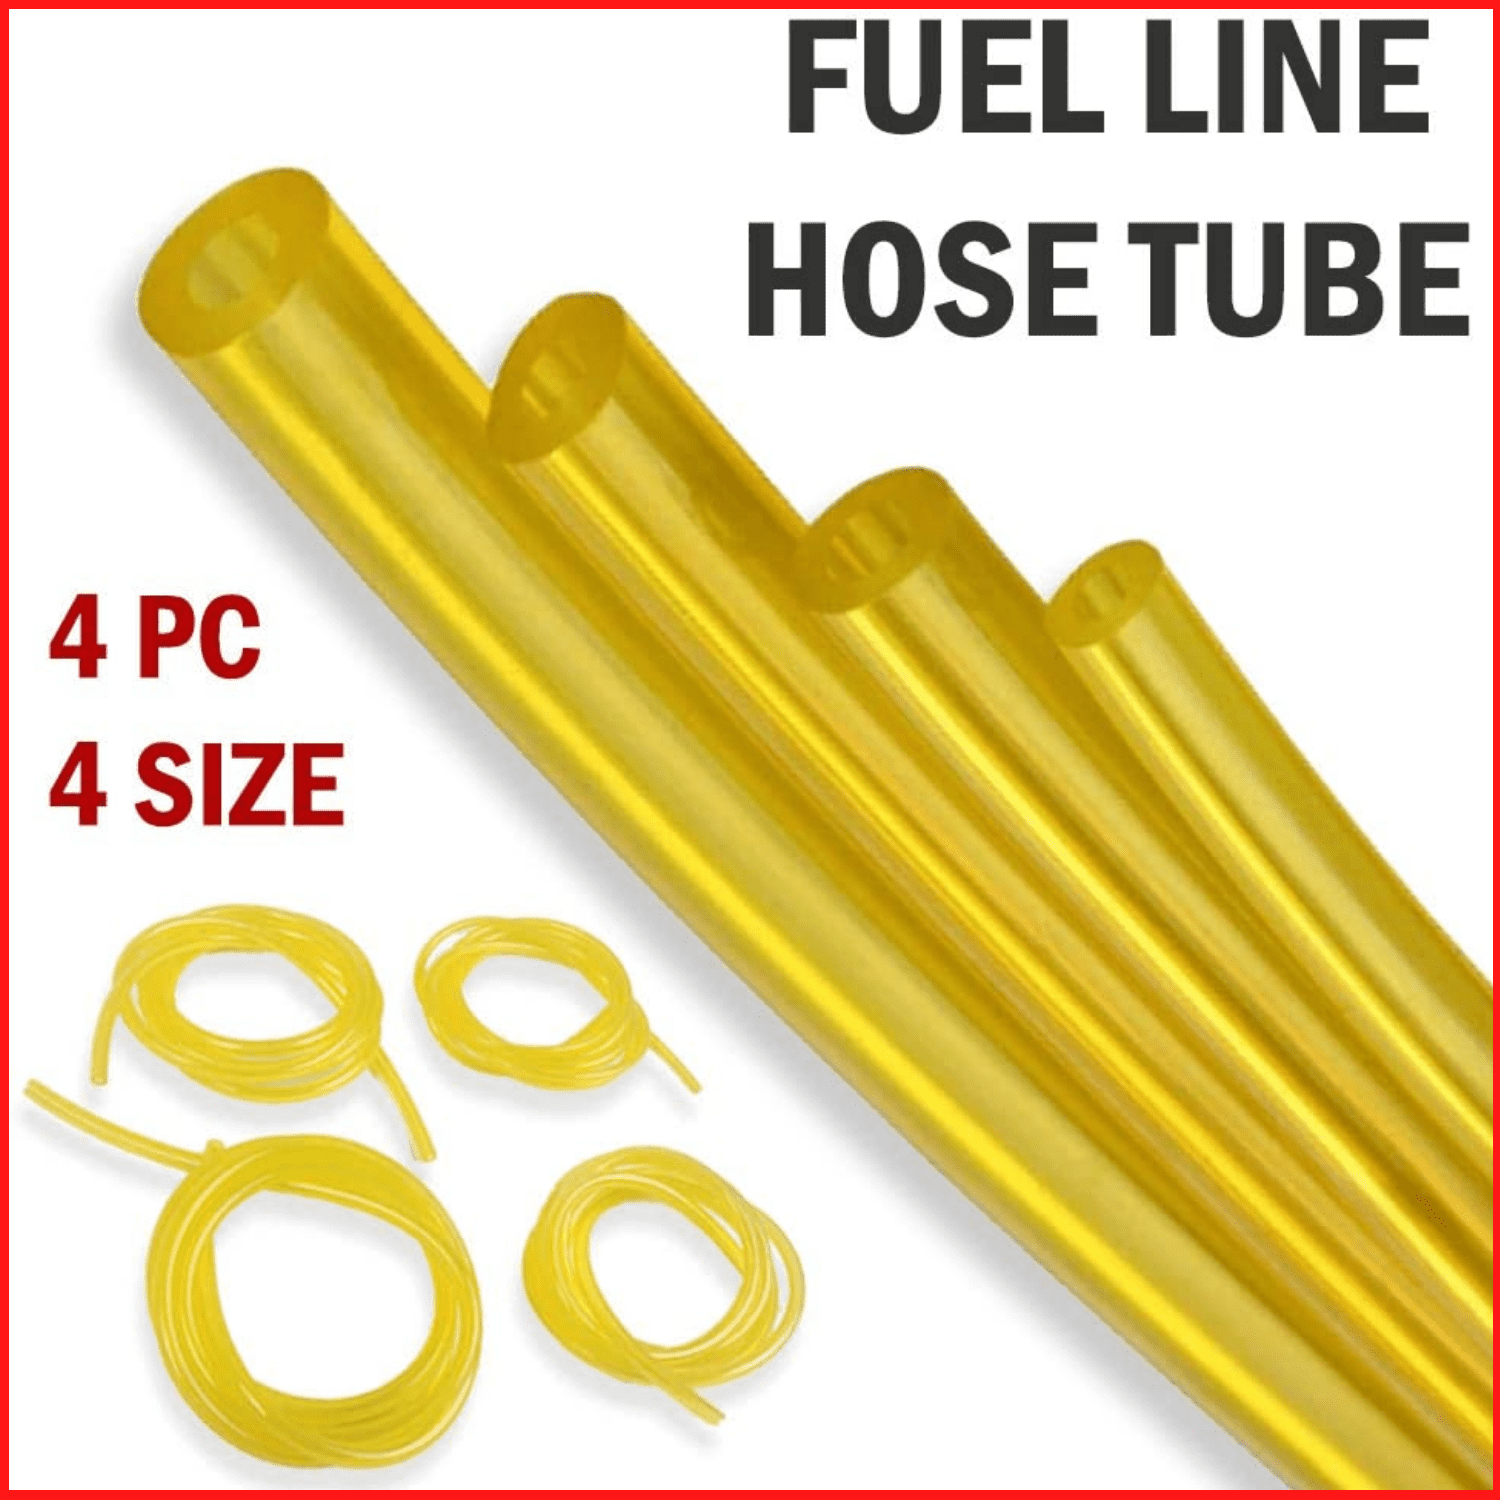 Details about   3Ft Petrol Fuel Line Hose 2 Size for Common 2 Cycle Small Engine Weedeater 